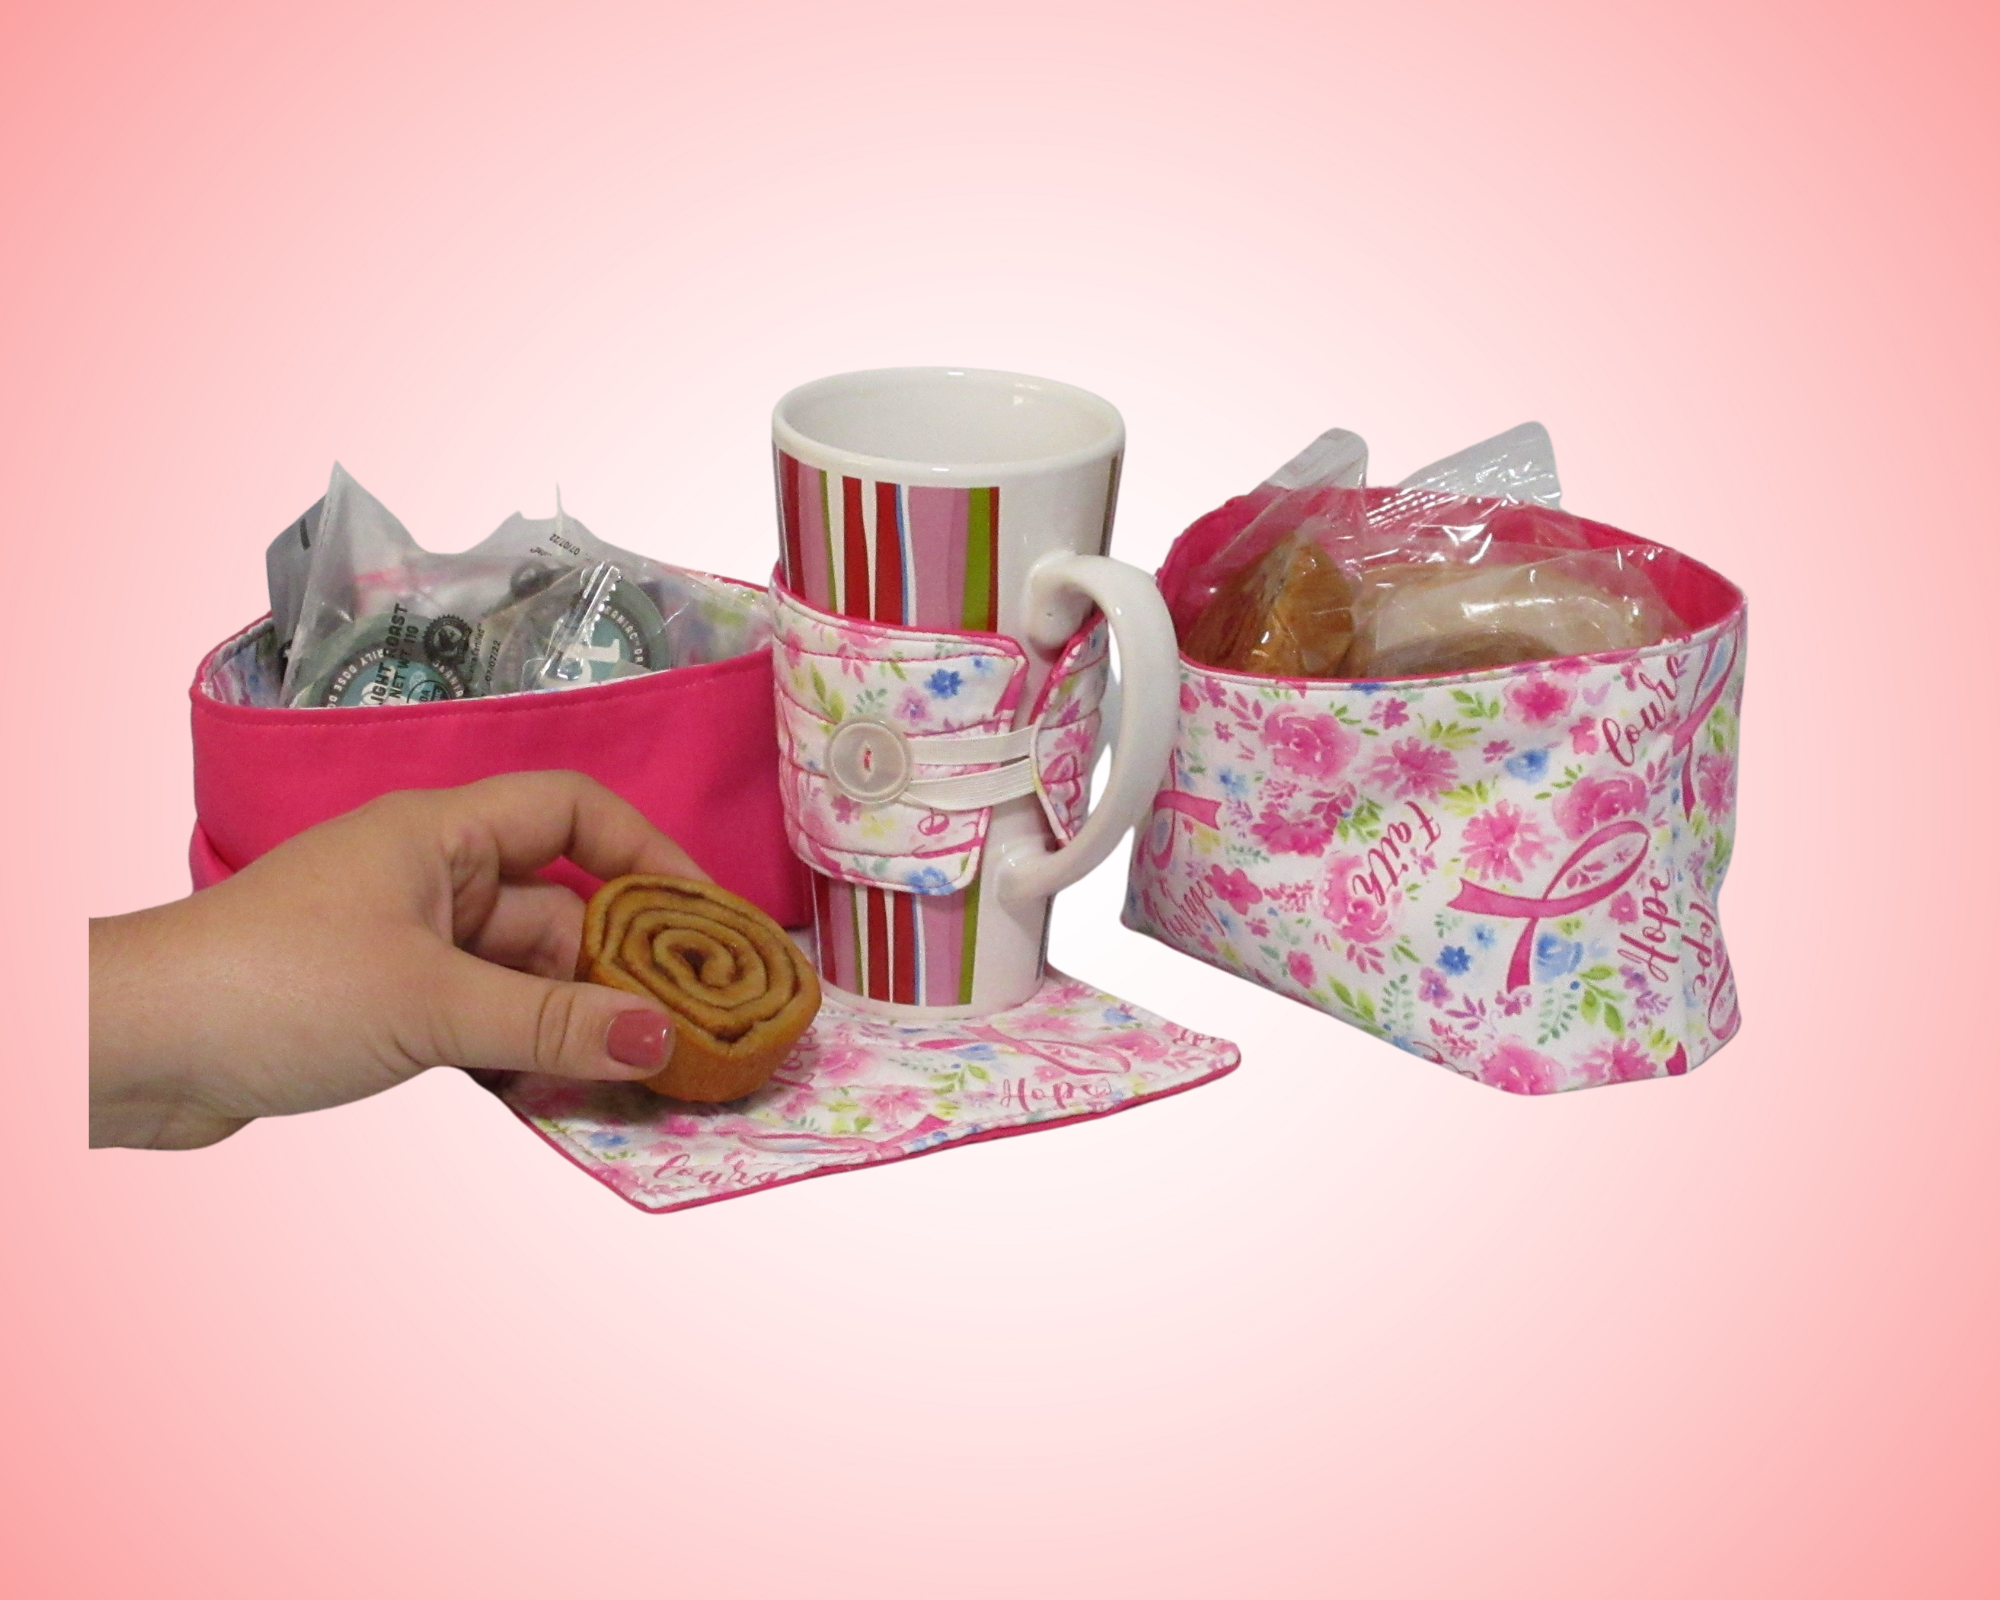 Pink ribbon caring gift set - 2 fabric baskets, one large mug rug / coaster and a cup cozy in pink ribbon, flowers, and words of hope pattern with a hot pink reverse.  In addition all products are reversible and support Breast cancer research.